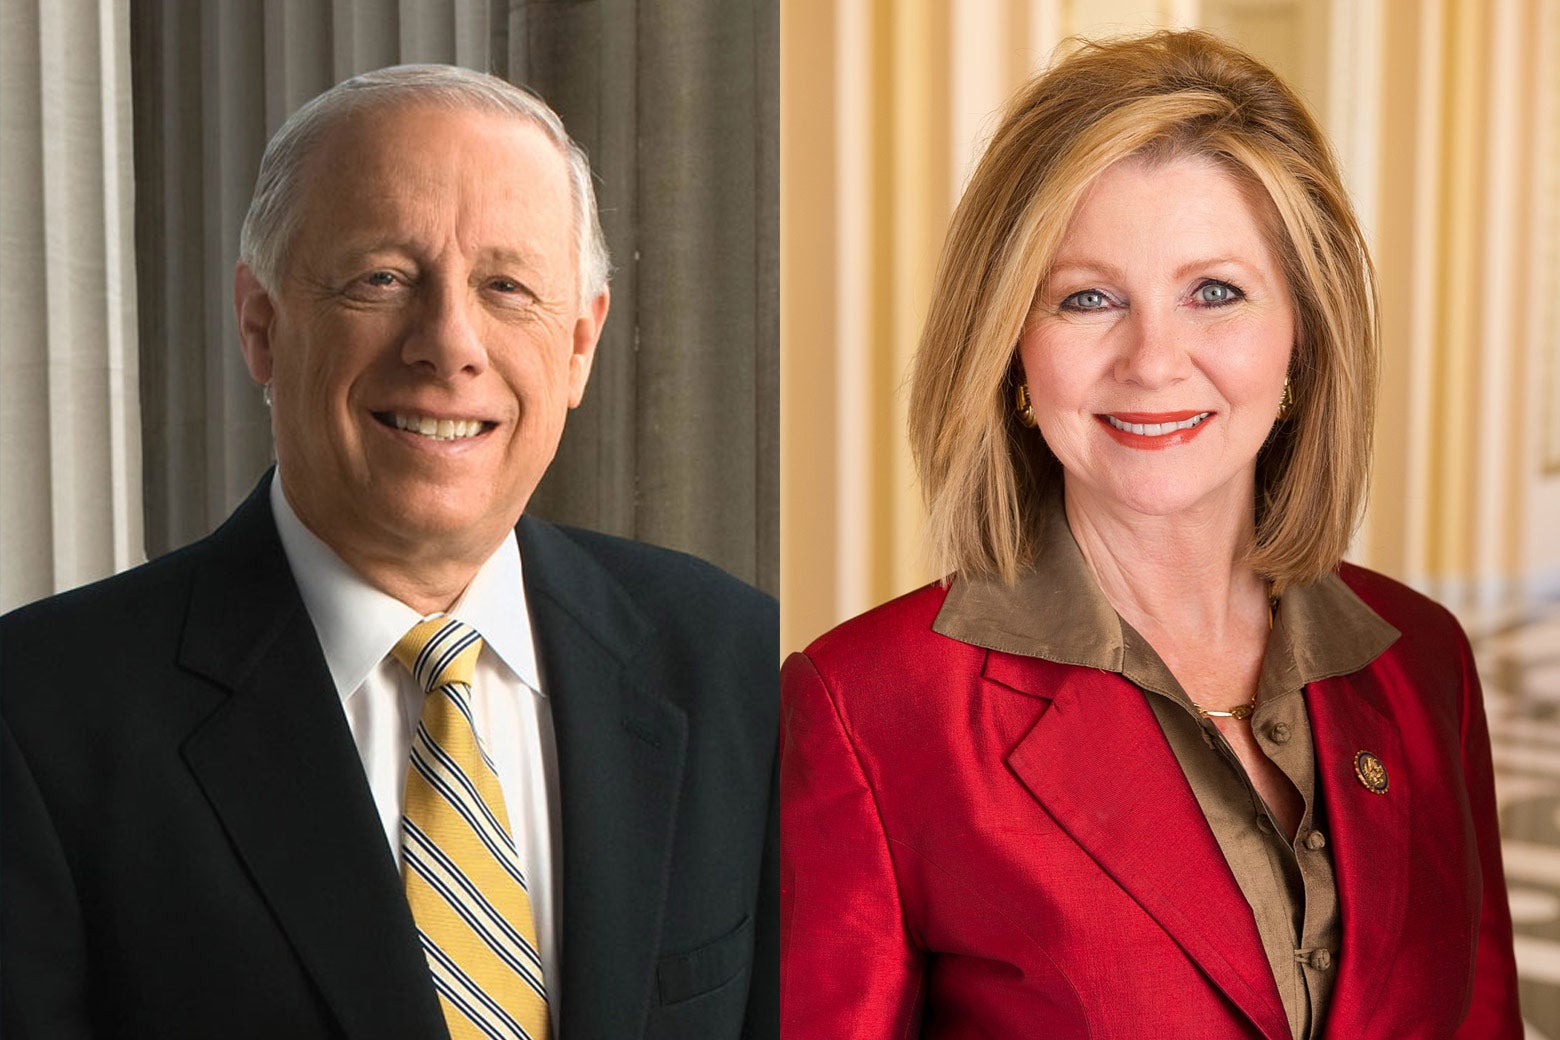 Official Tennessee state photograph of Phil Bredesen and Marsha Blackburn, member of the United States Congress.